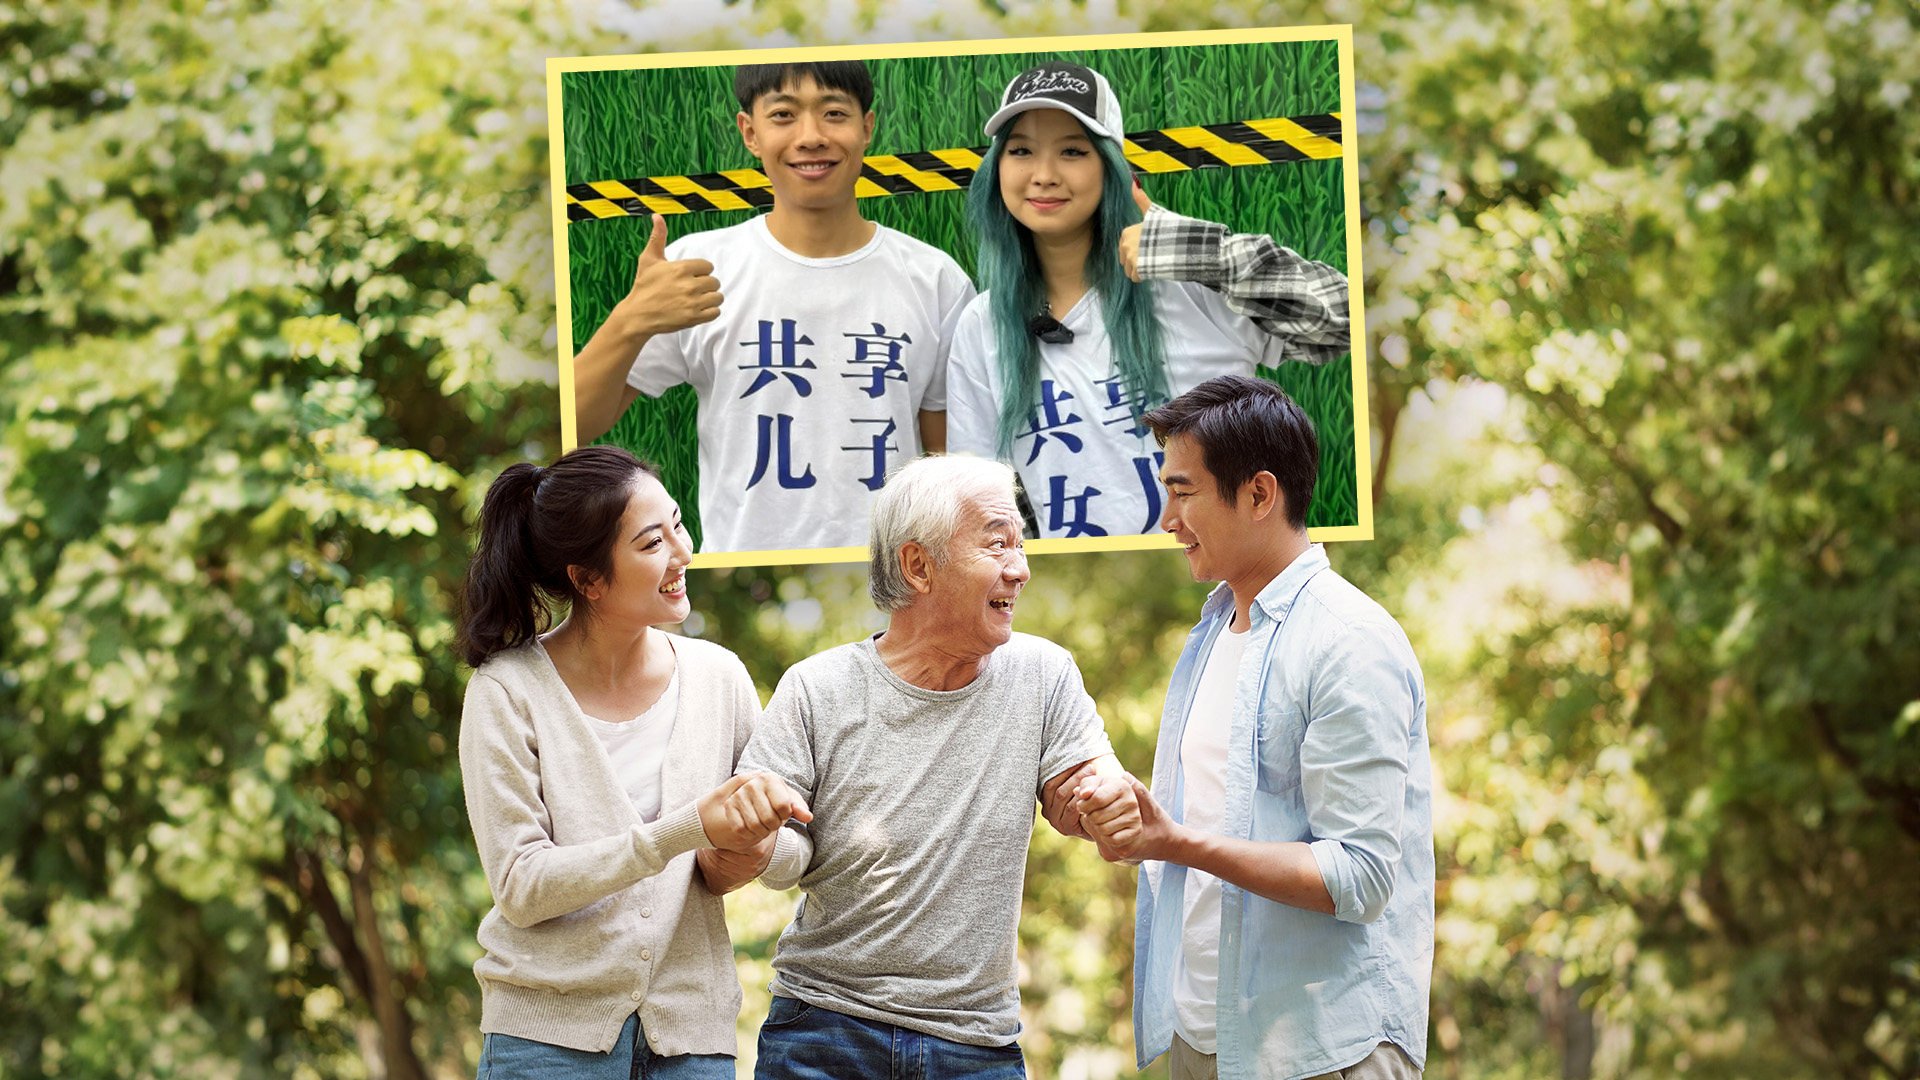 Young people in China have launched a Good Samaritan-like initiative on social media to help older strangers in need. Photo: SCMP composite/Shutterstock/Xiaohongshu